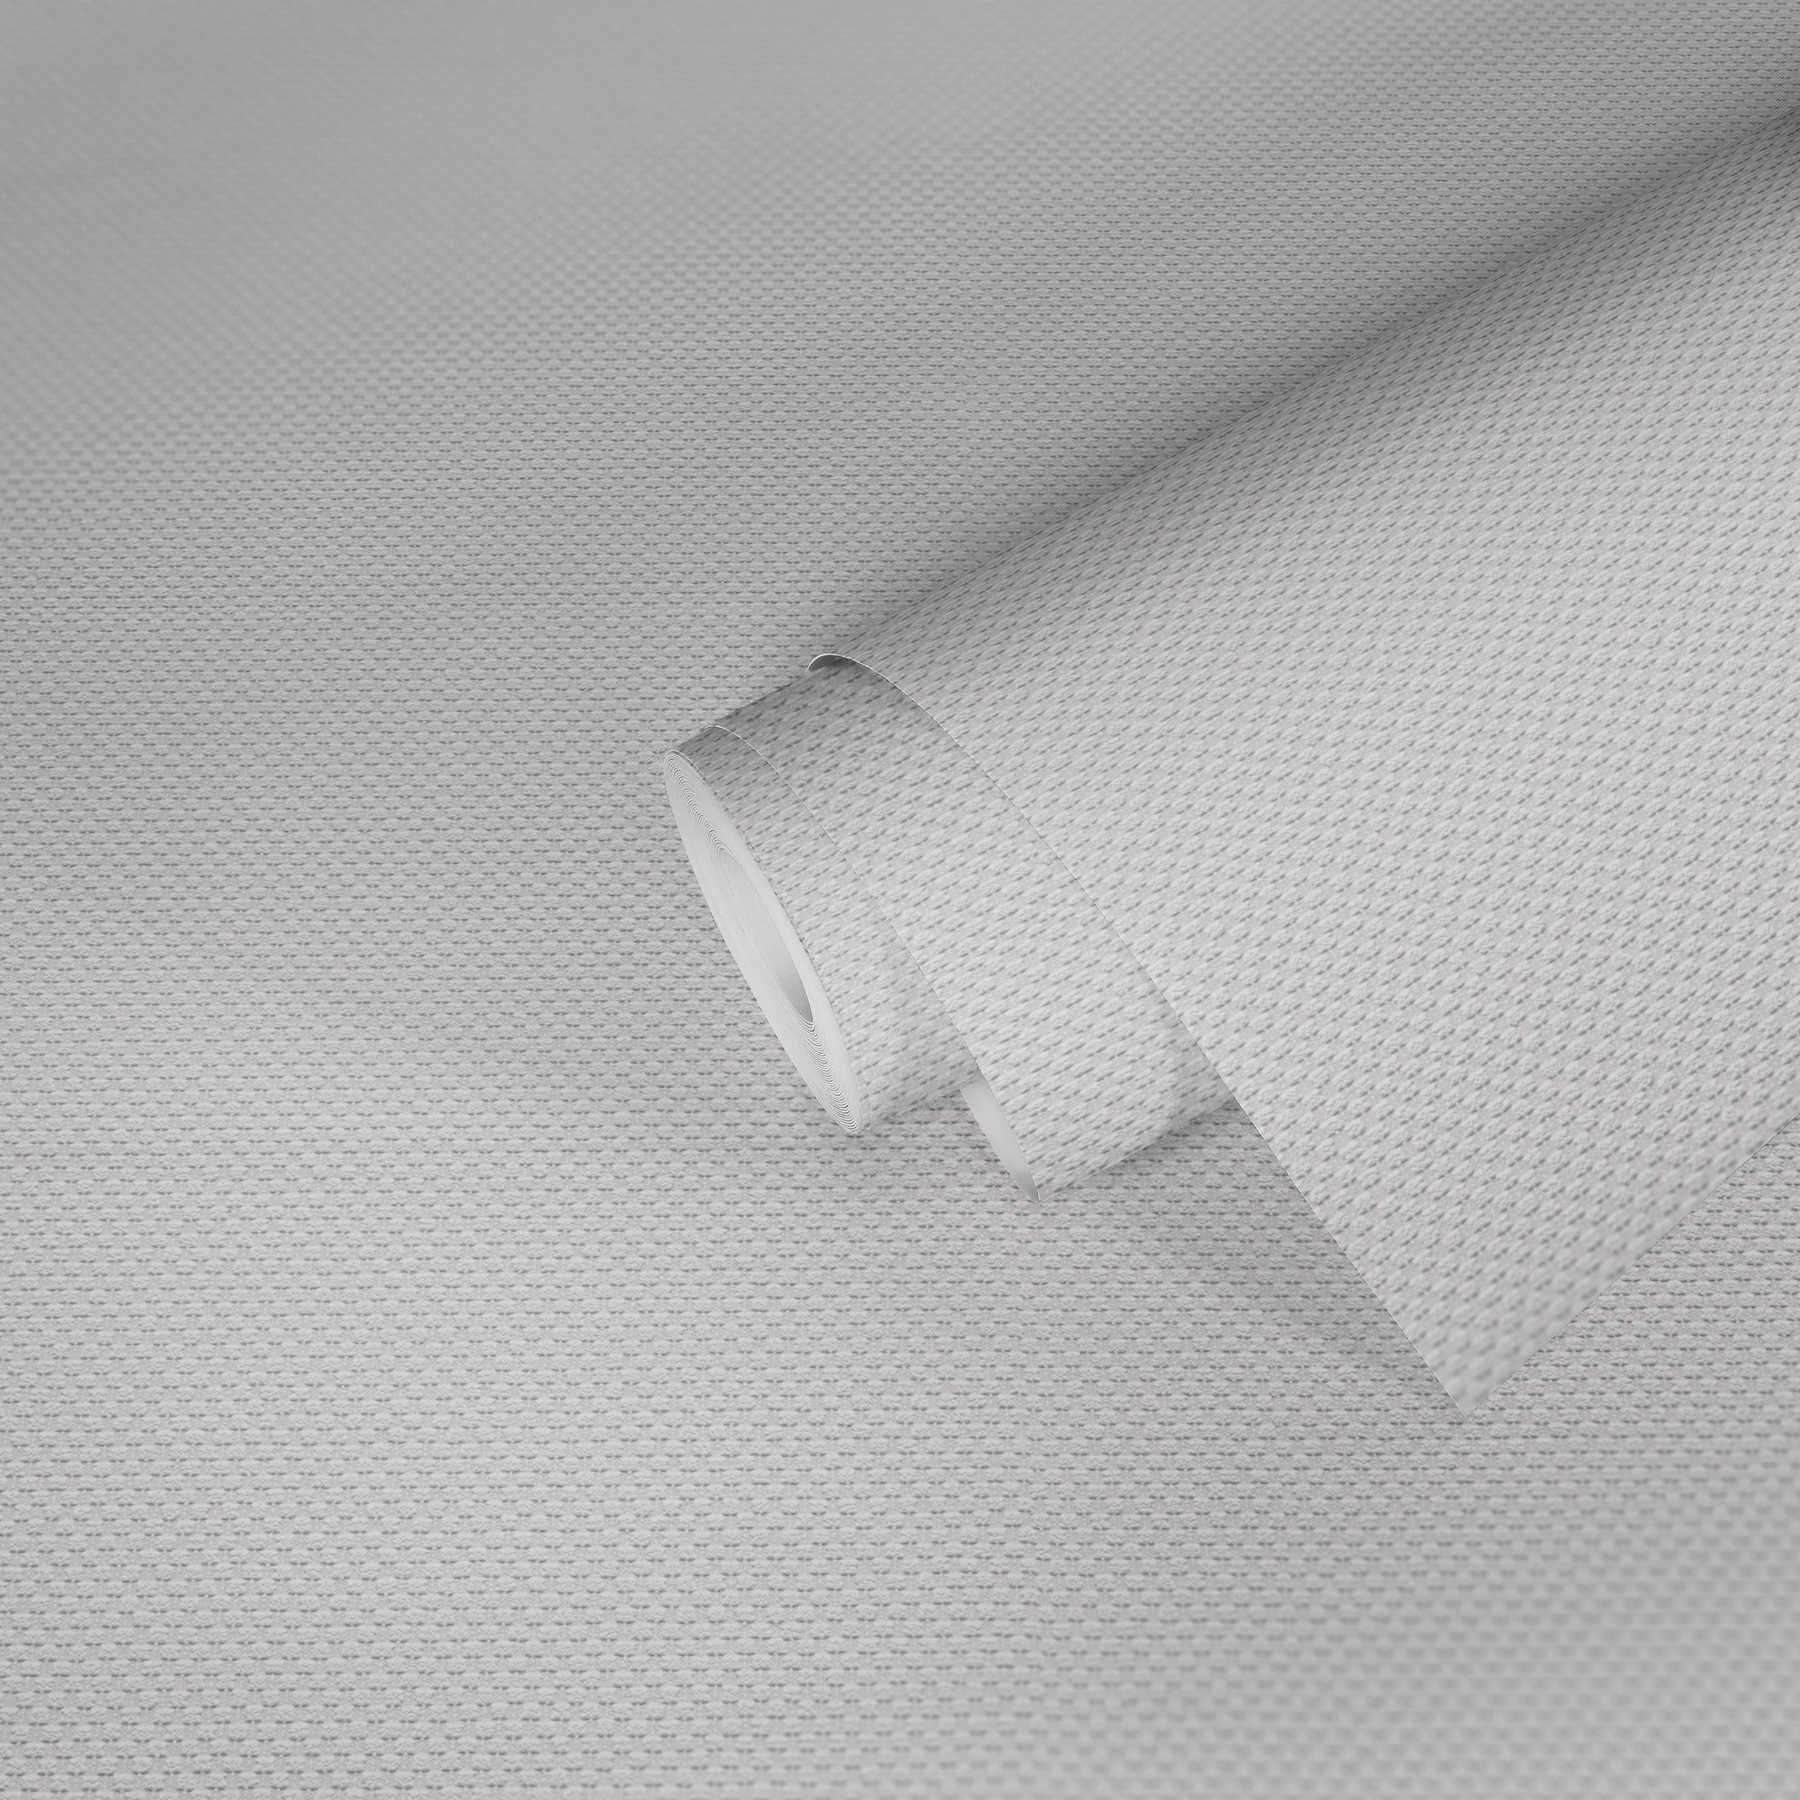             Plain Wallpaper with fabric look - white
        